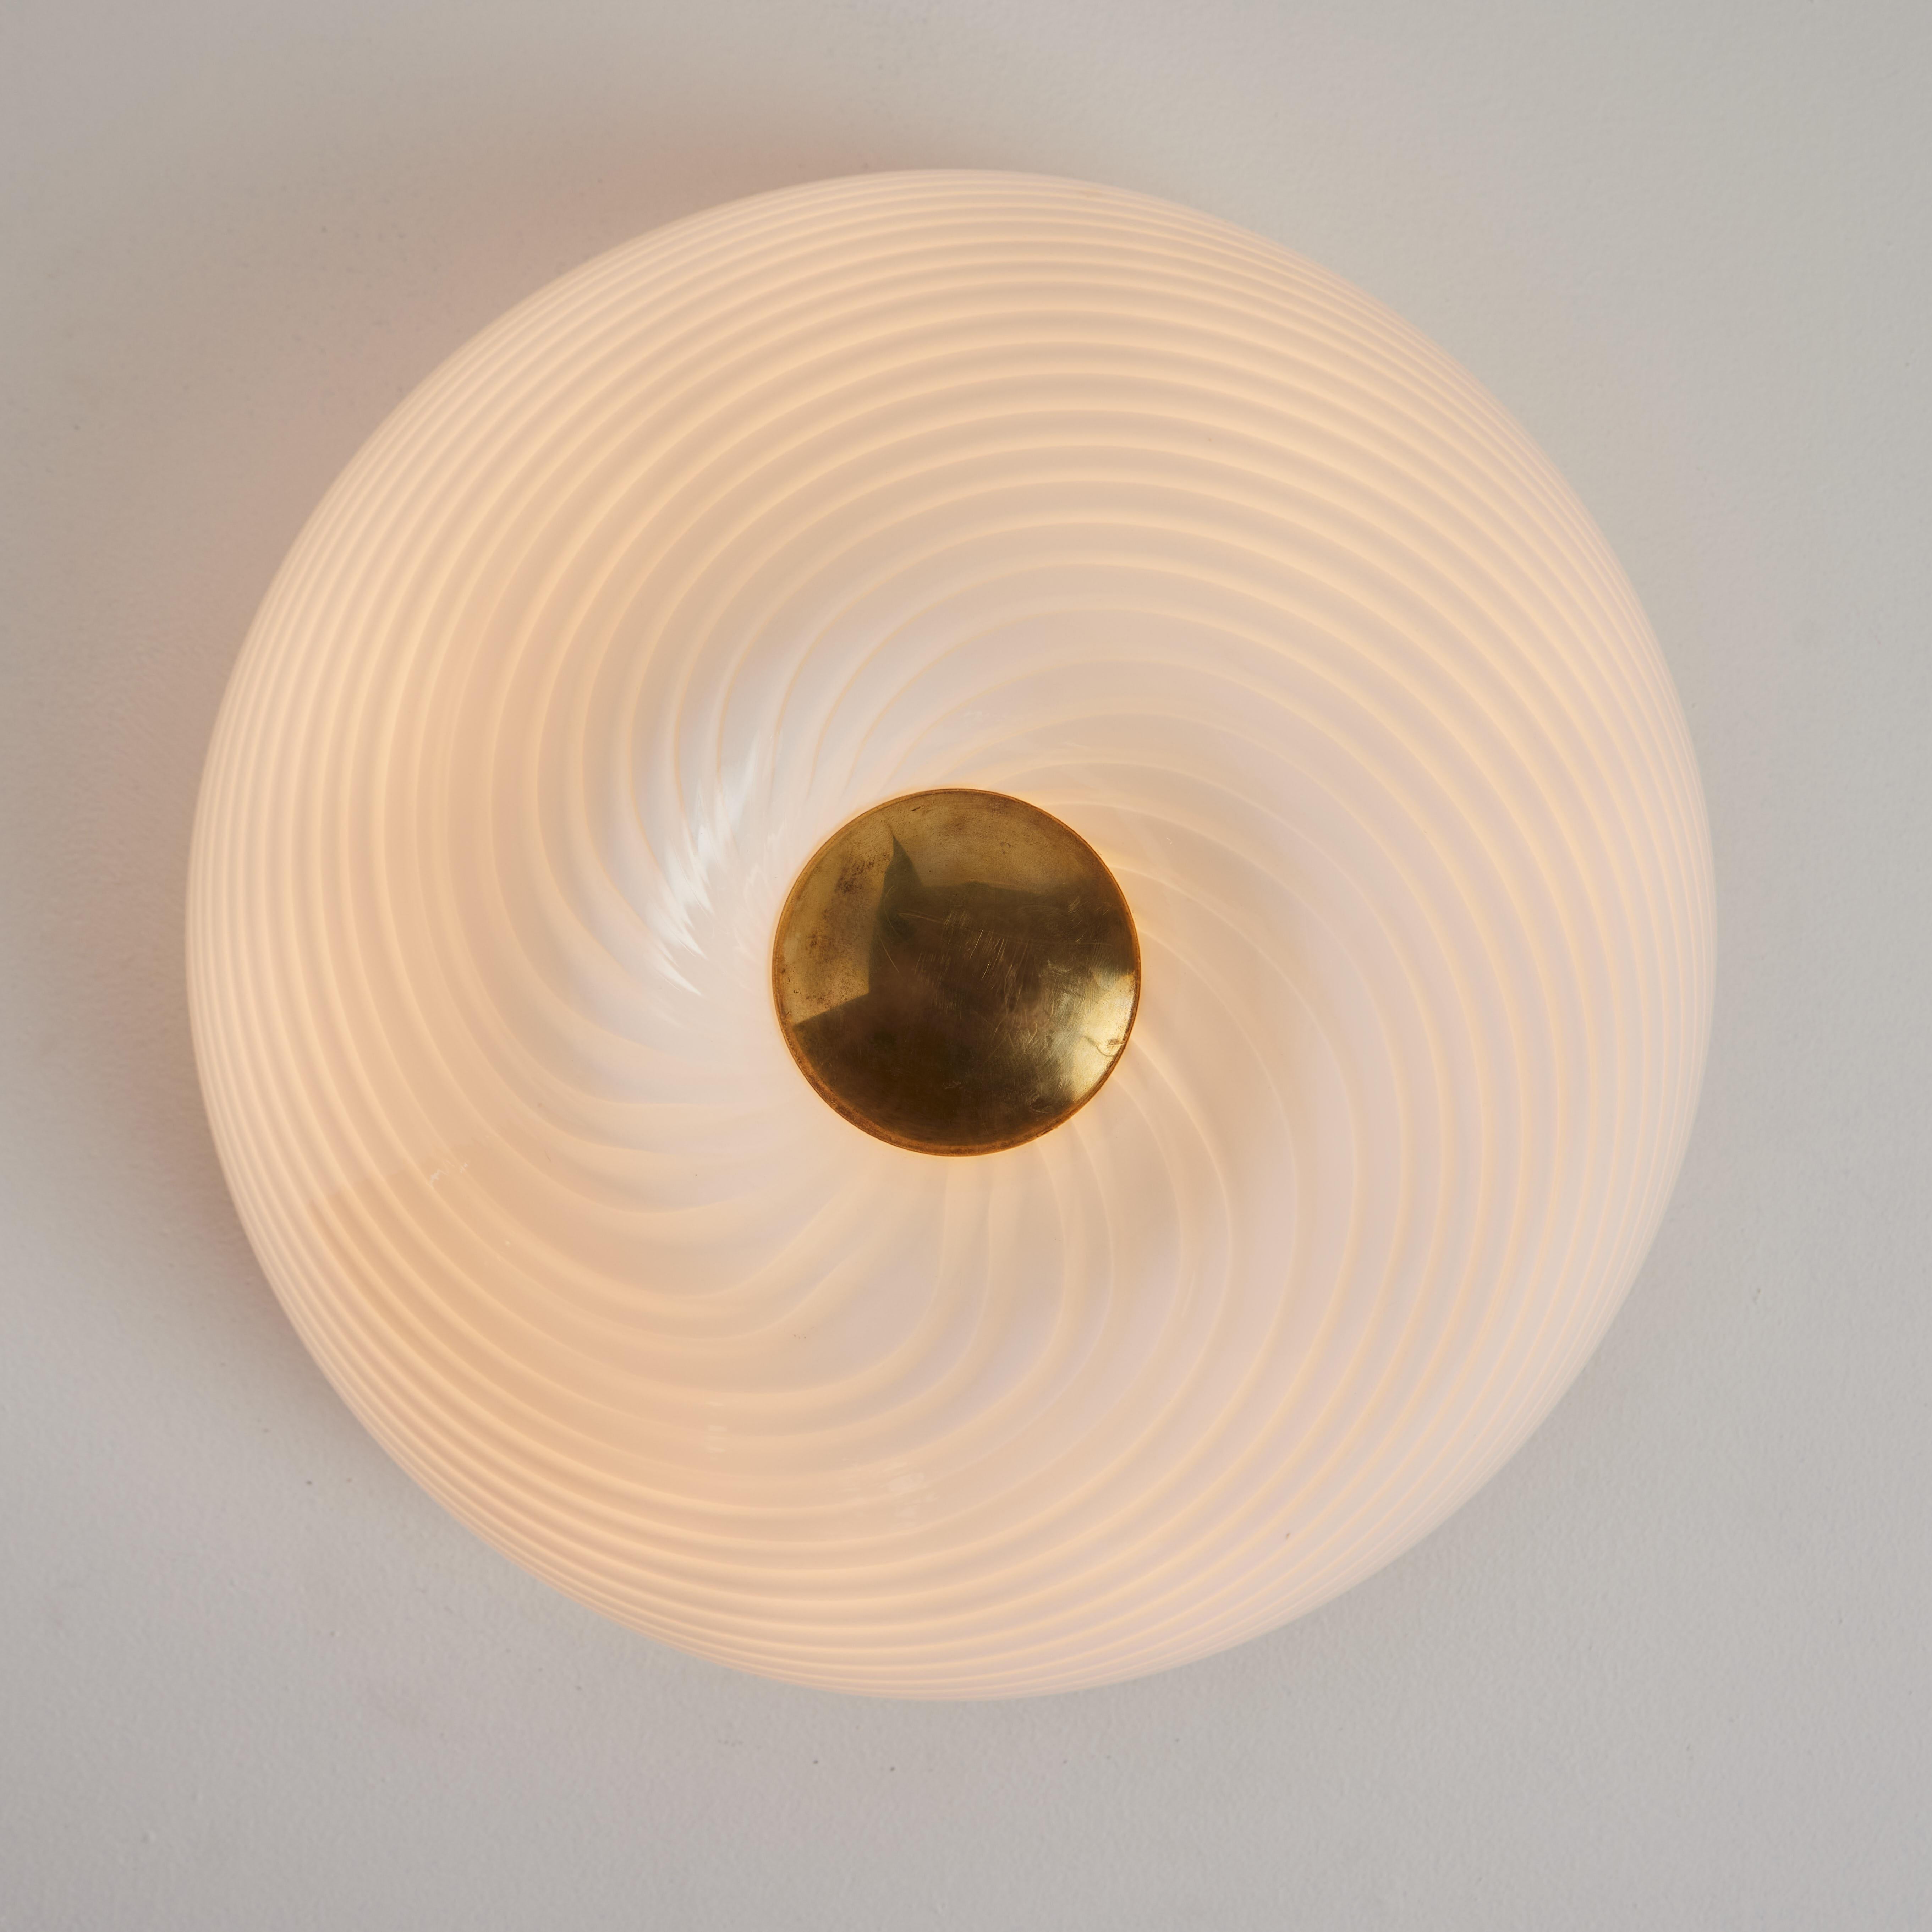 Large 1960s Vistosi Blown Murano Brass and Glass Wall or Ceiling Light.

Executed in blown Murano glass with a brass centerpiece, this rare flush mount features a distinctive spiral pattern and can be installed on either the wall or the ceiling. Its